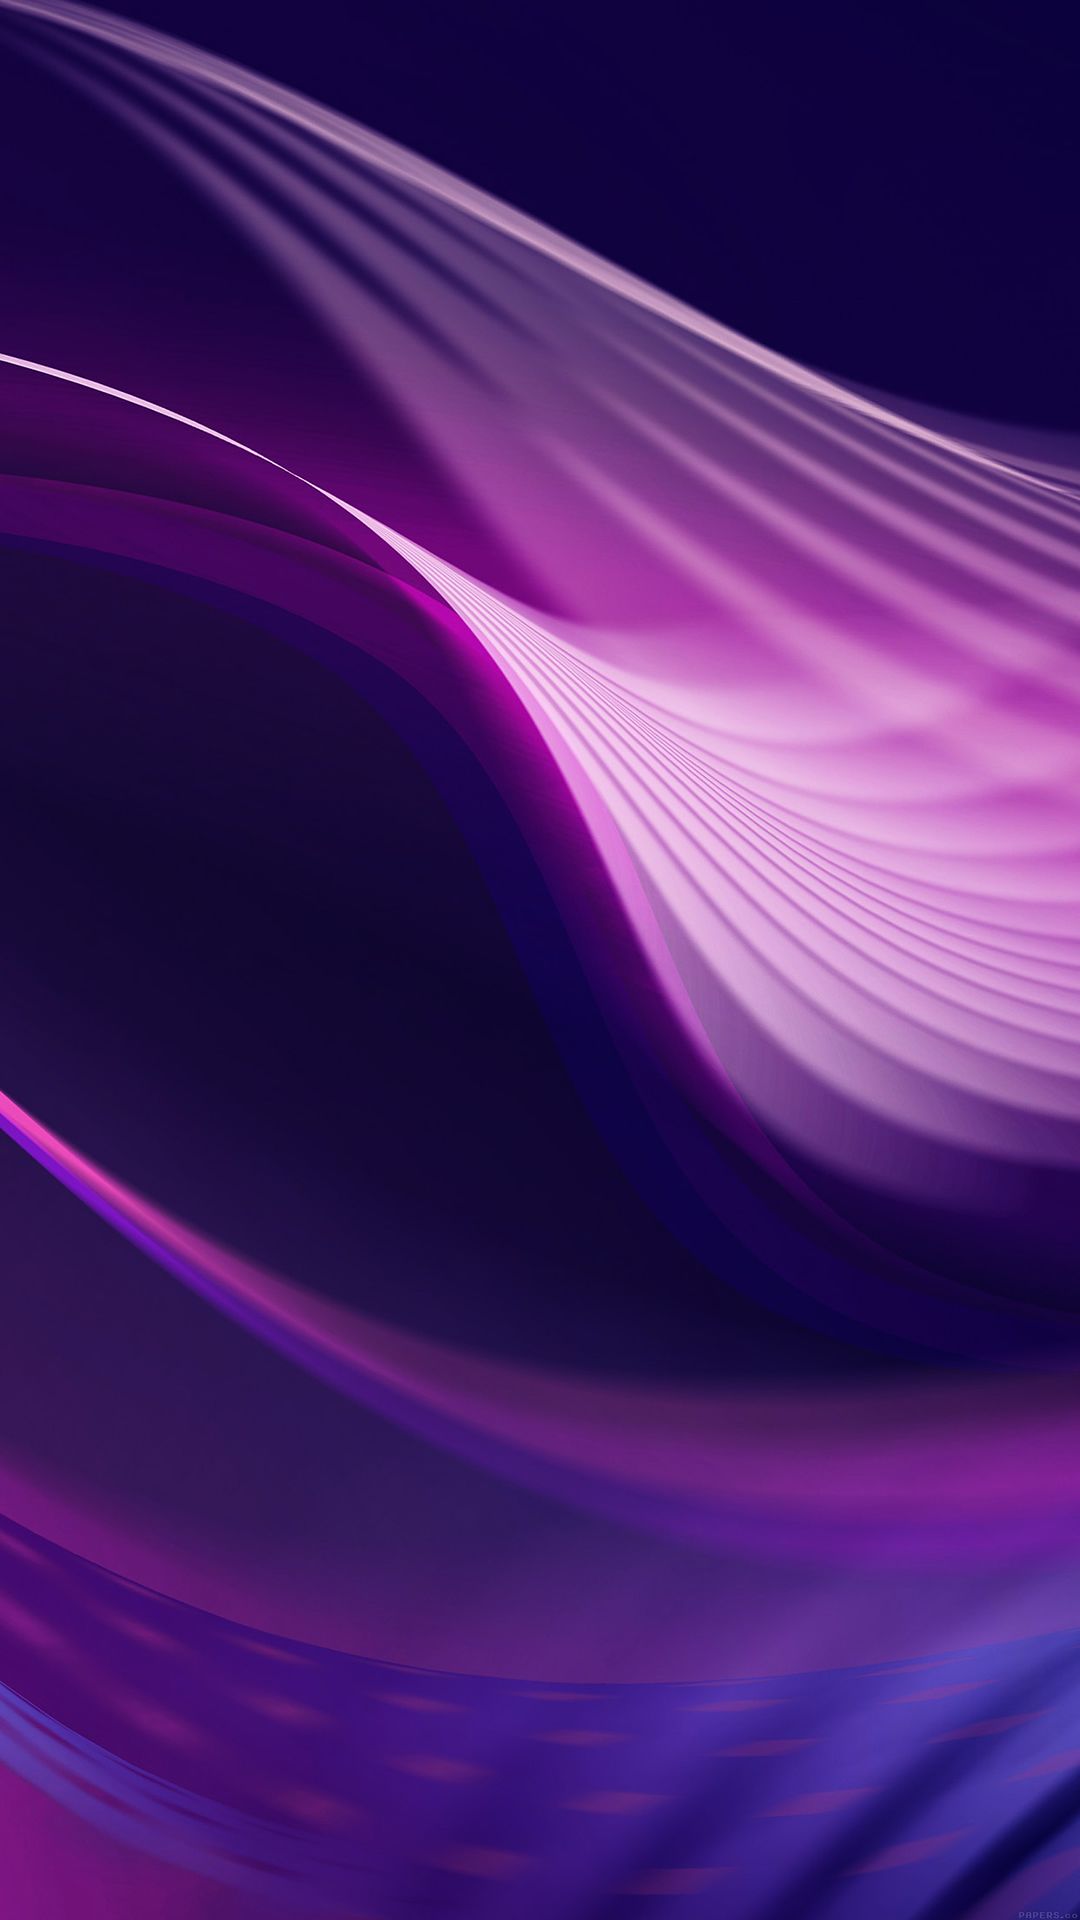 Wave Abstract Purple Pattern IPhone 6 Wallpaper Download. IPhone Wallpaper, IPad Wallpaper One Stop Download. Abstract, Phone Wallpaper, Purple Wallpaper